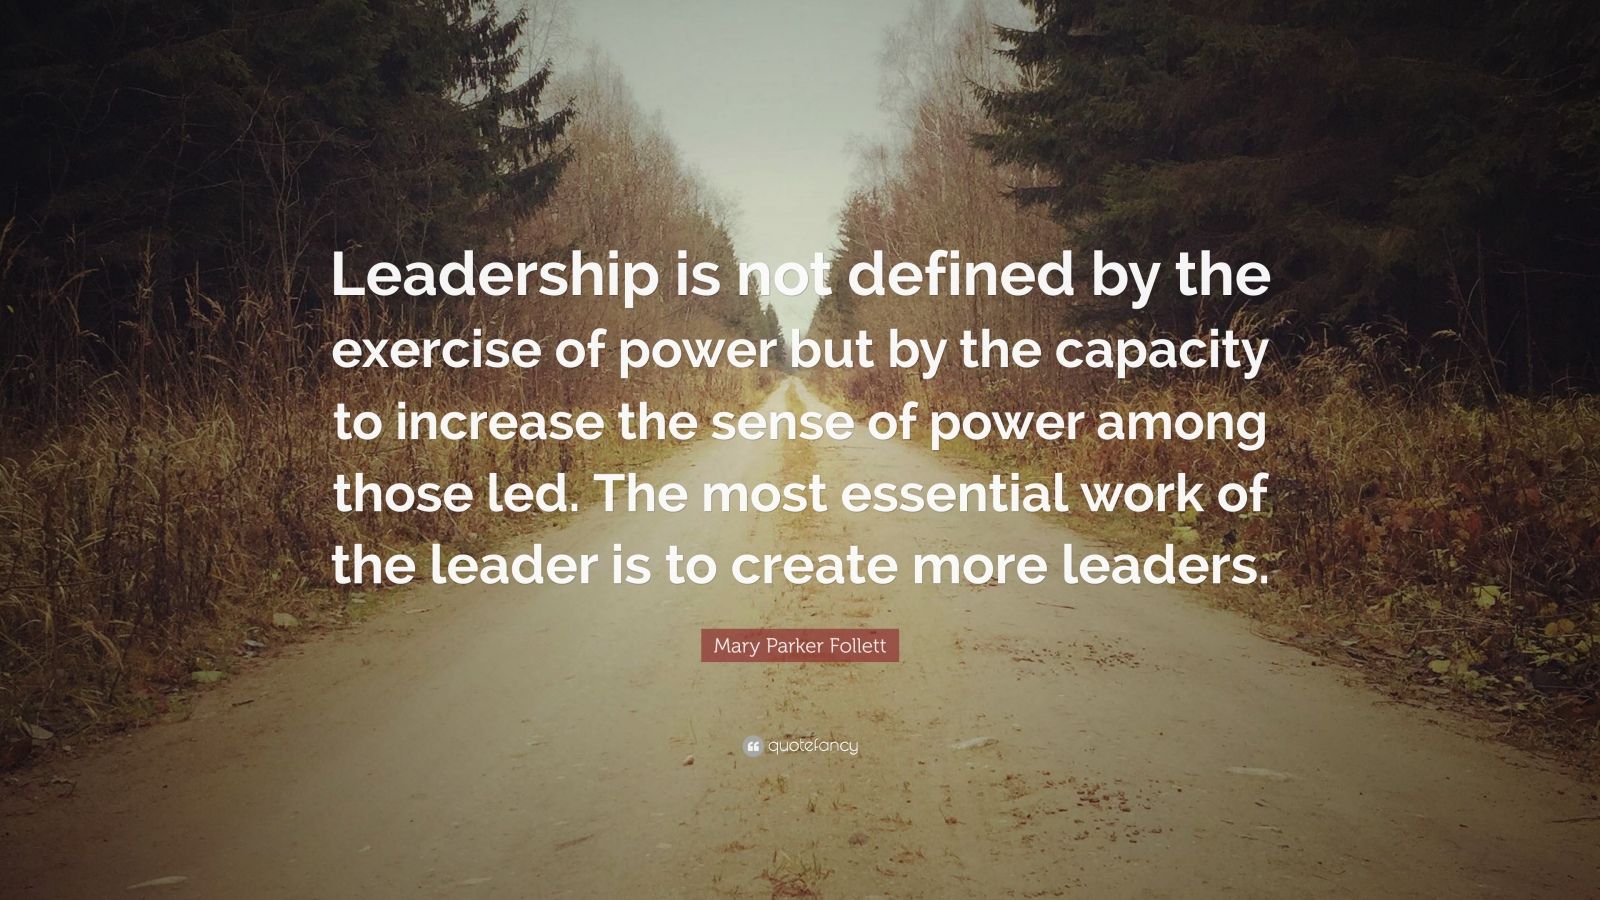 Mary Parker Follett Quote: “Leadership is not defined by the exercise